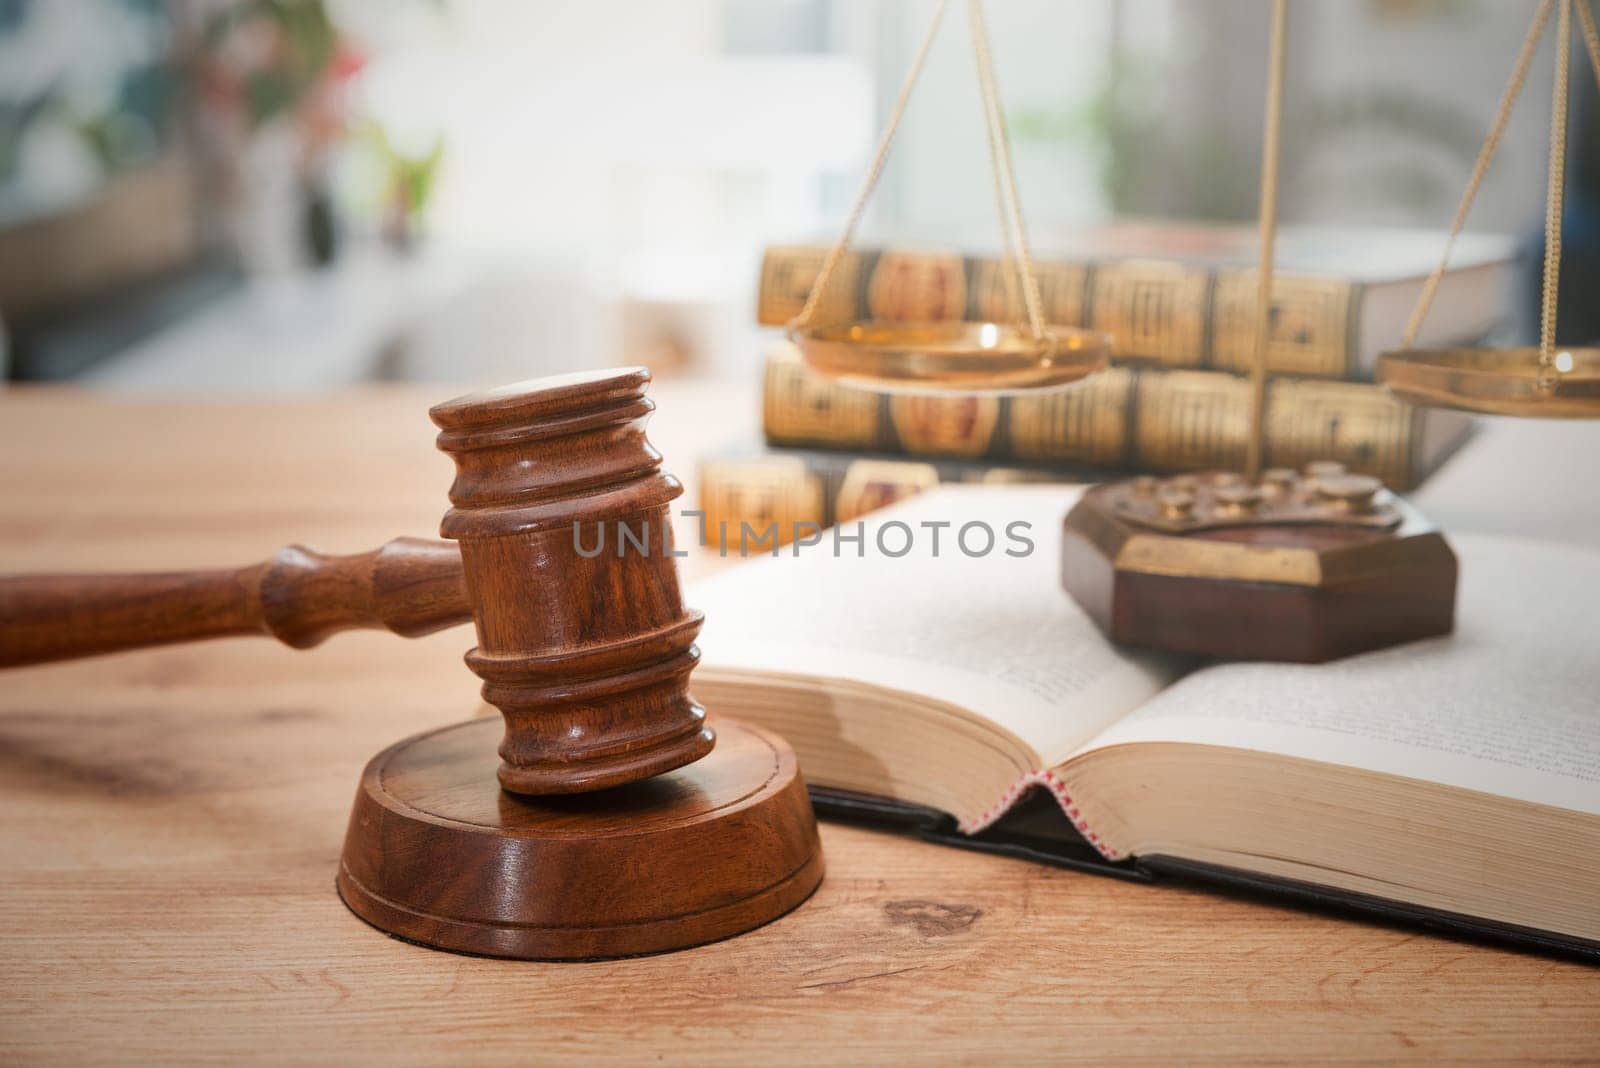 Wooden gavel with books in background by simpson33